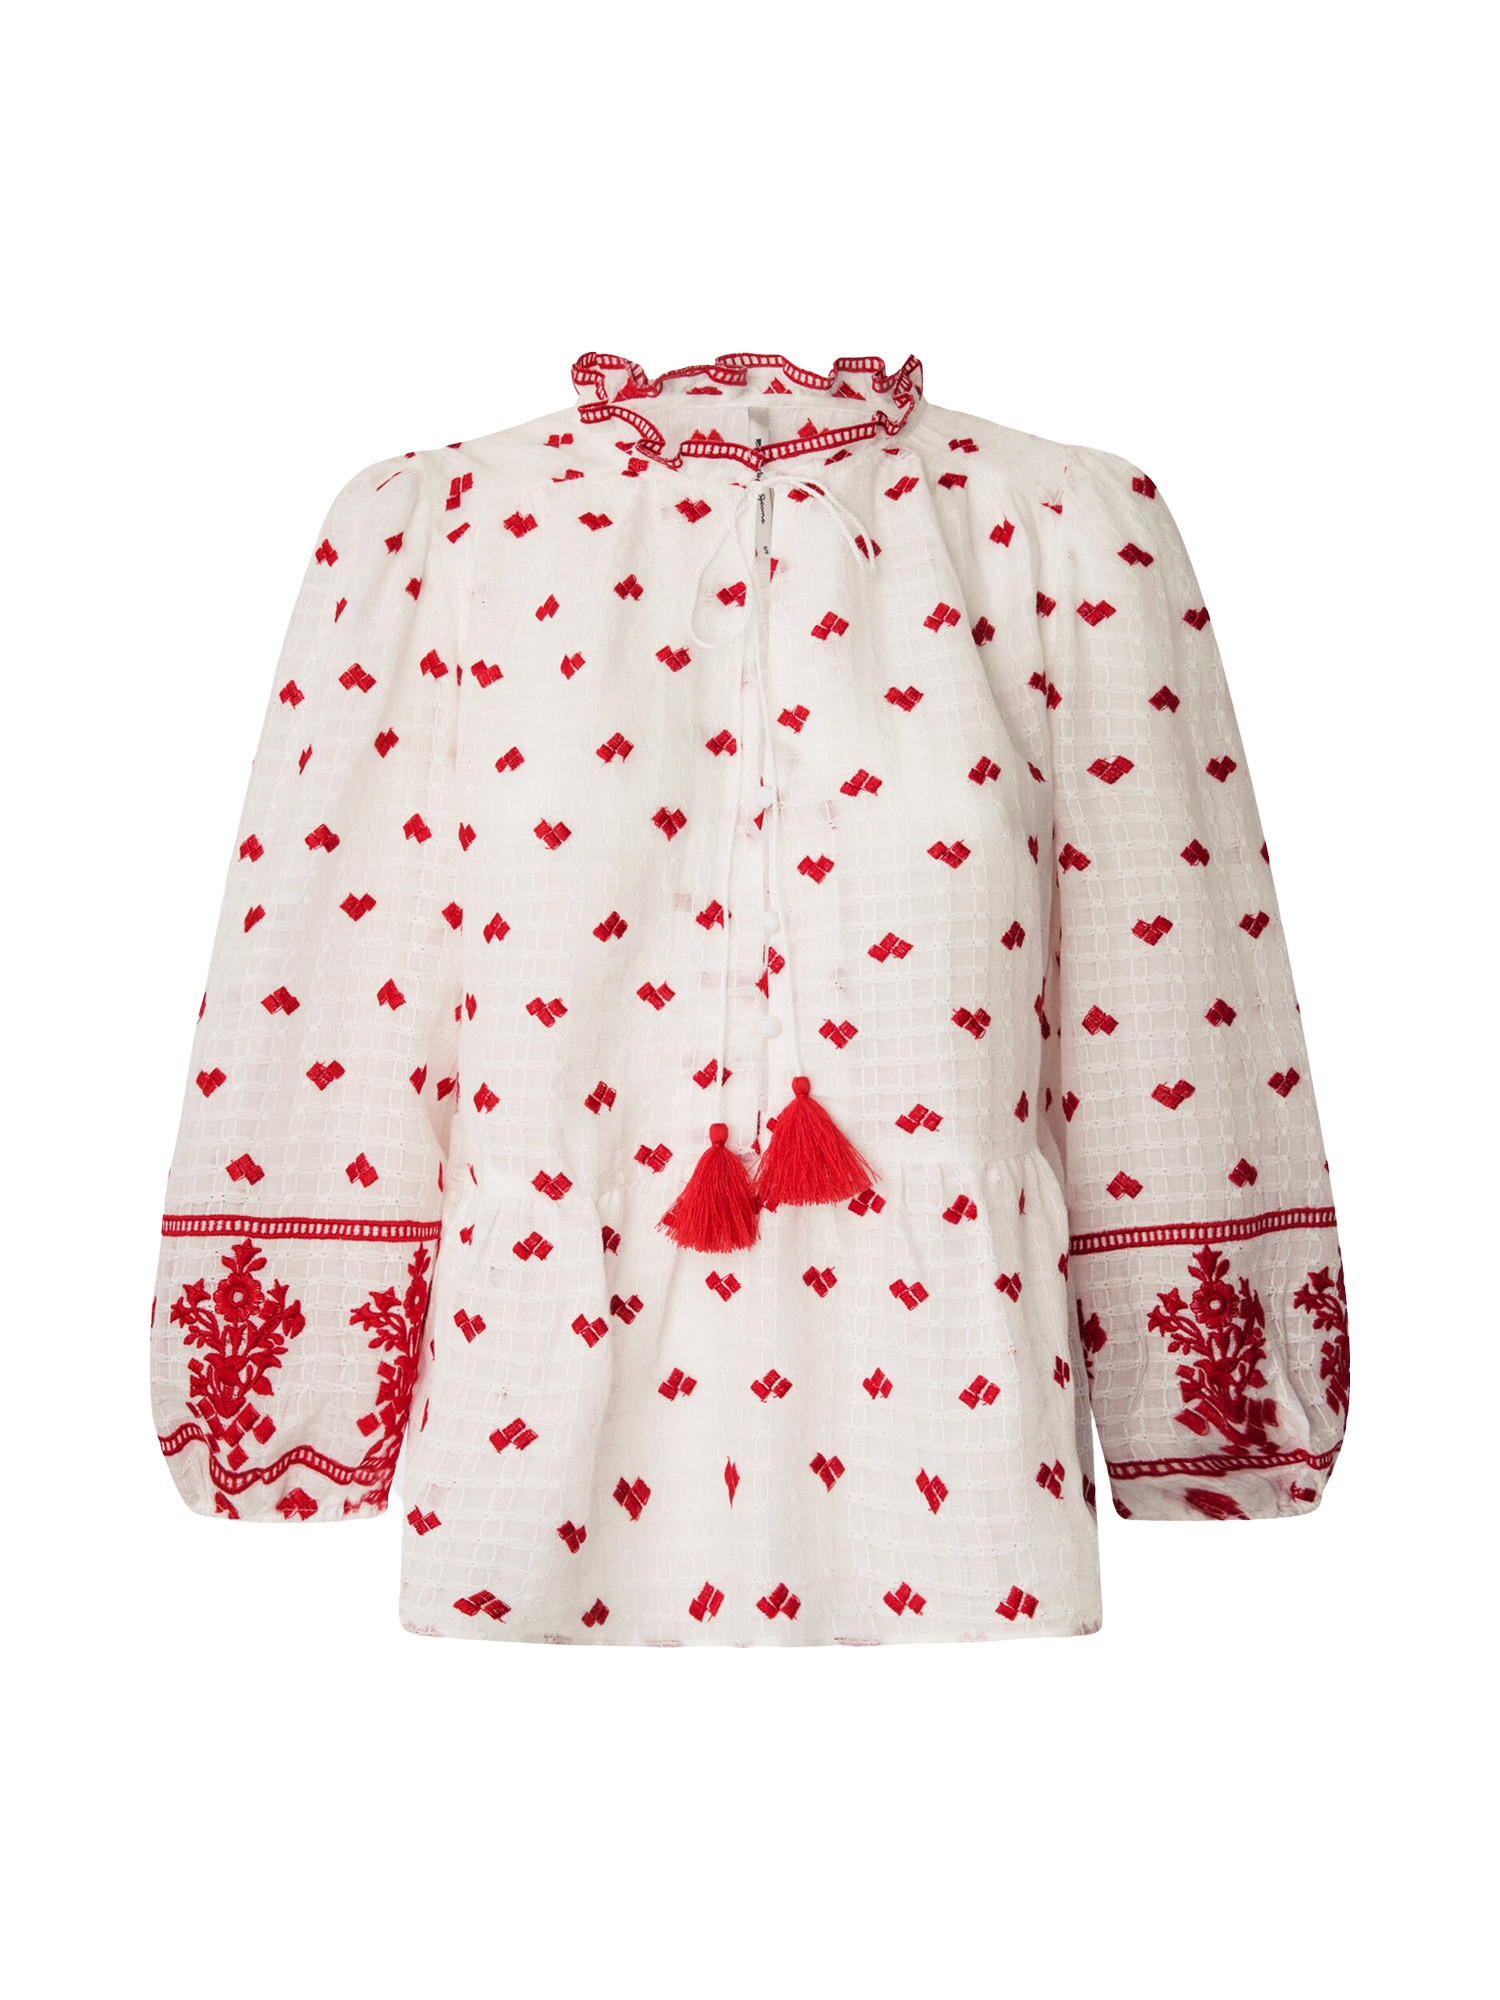 Pepe Jeans - Patterned blouse, Red, large image number 0